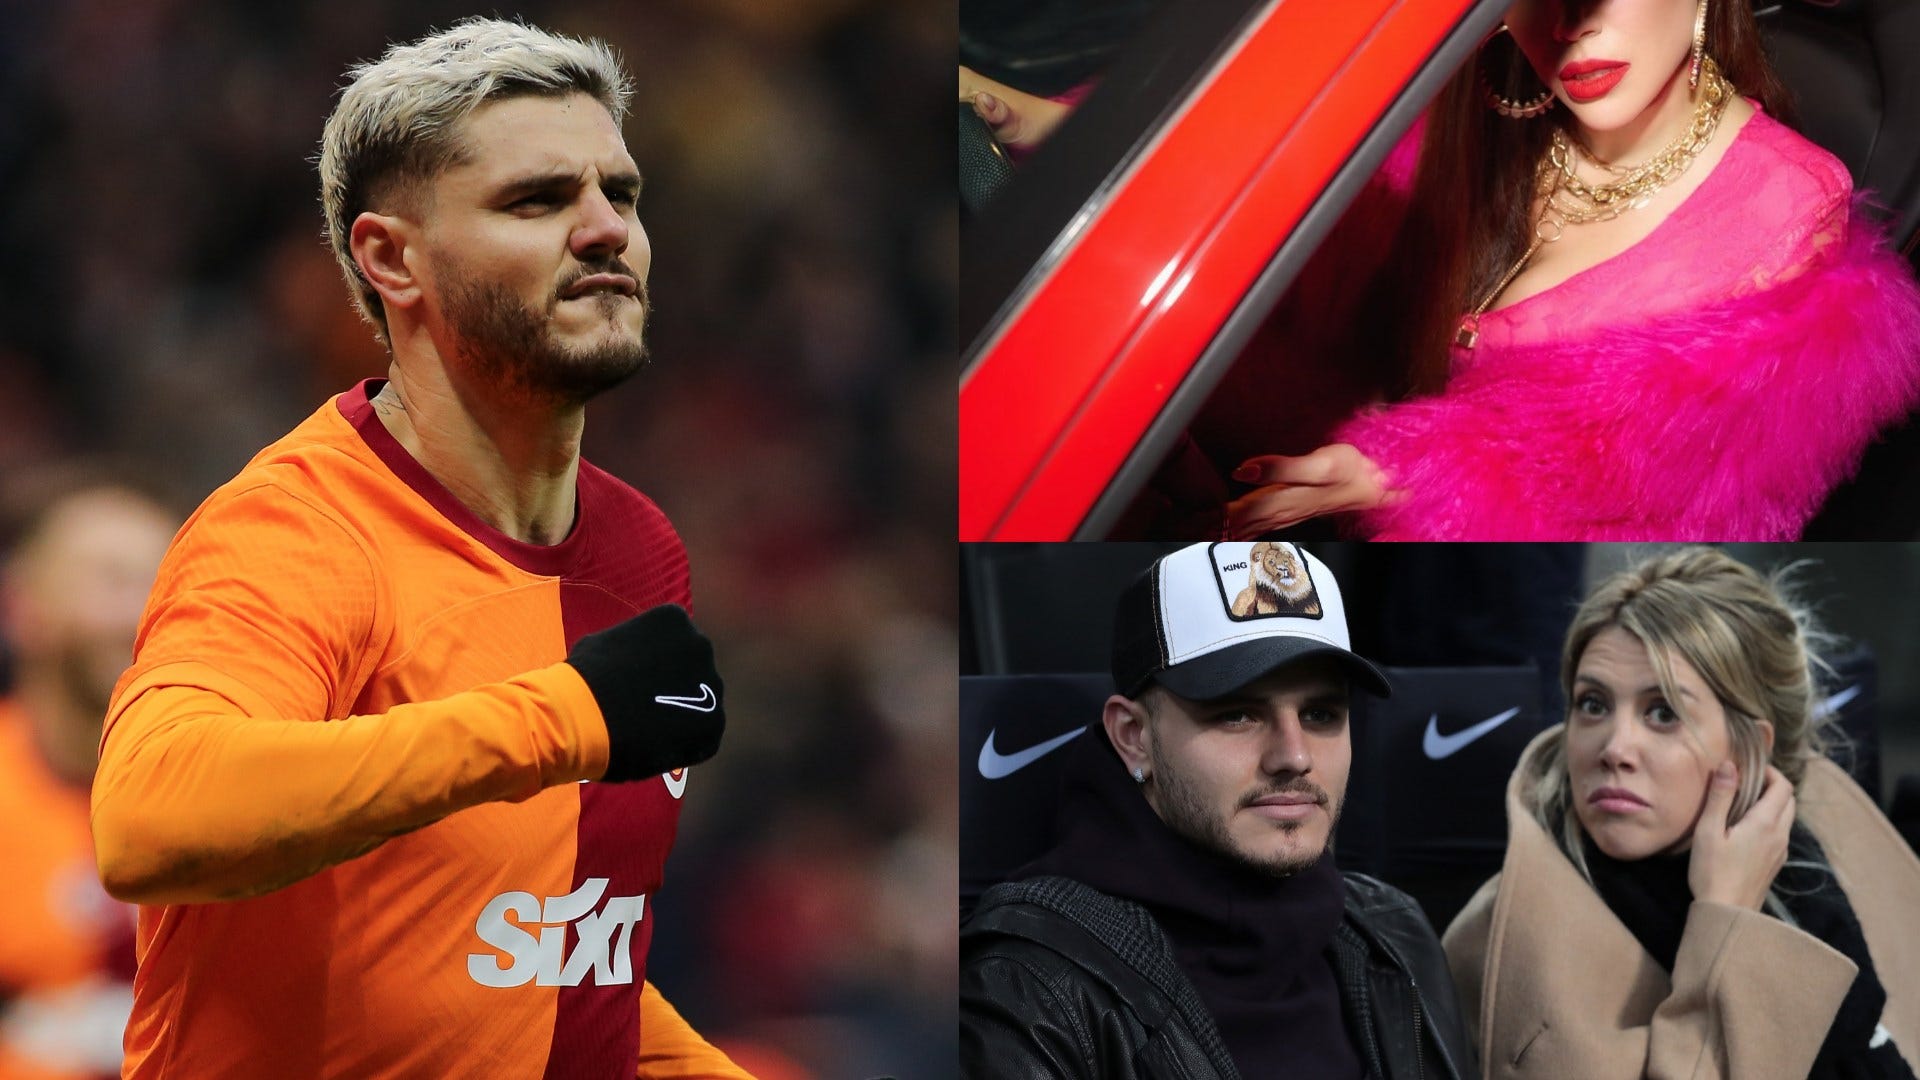 Wanda Nara x Ferrari: Mauro Icardi's wife & agent poses for racy photos as she appears to tease collaboration with world famous Italian sports car manufacturer